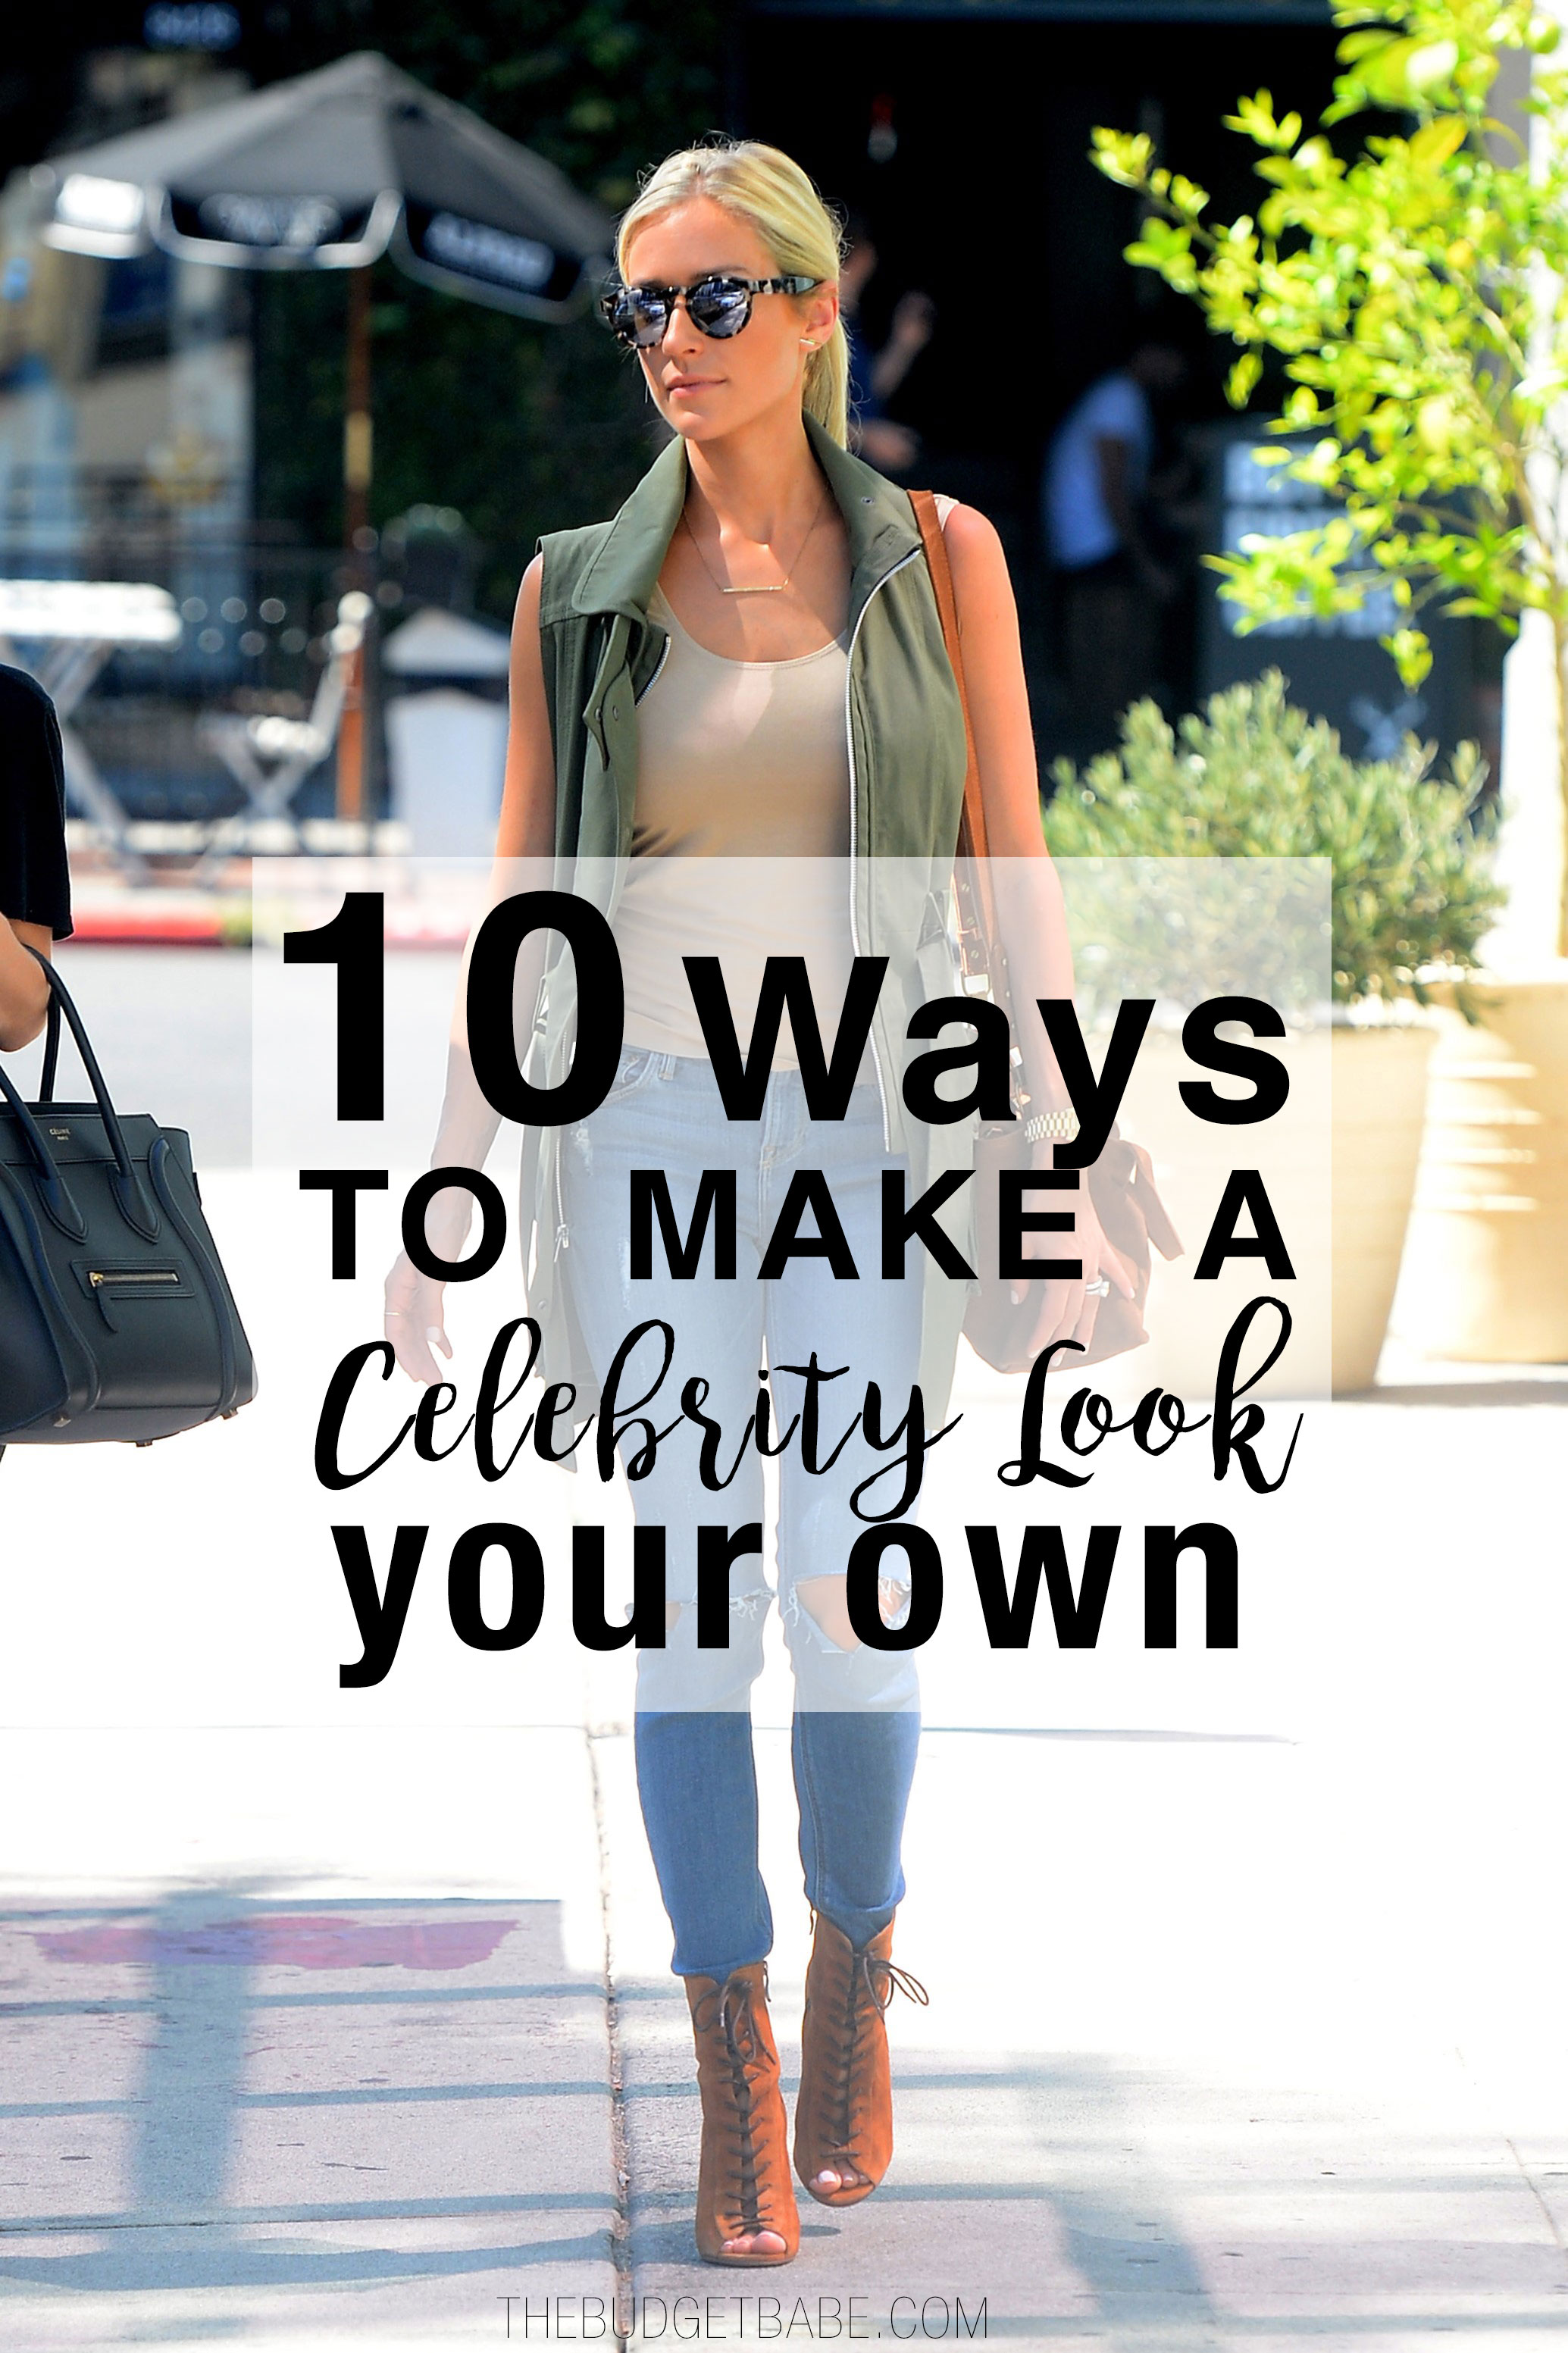 Here's how to get inspired by your favorite celebrity fashion.